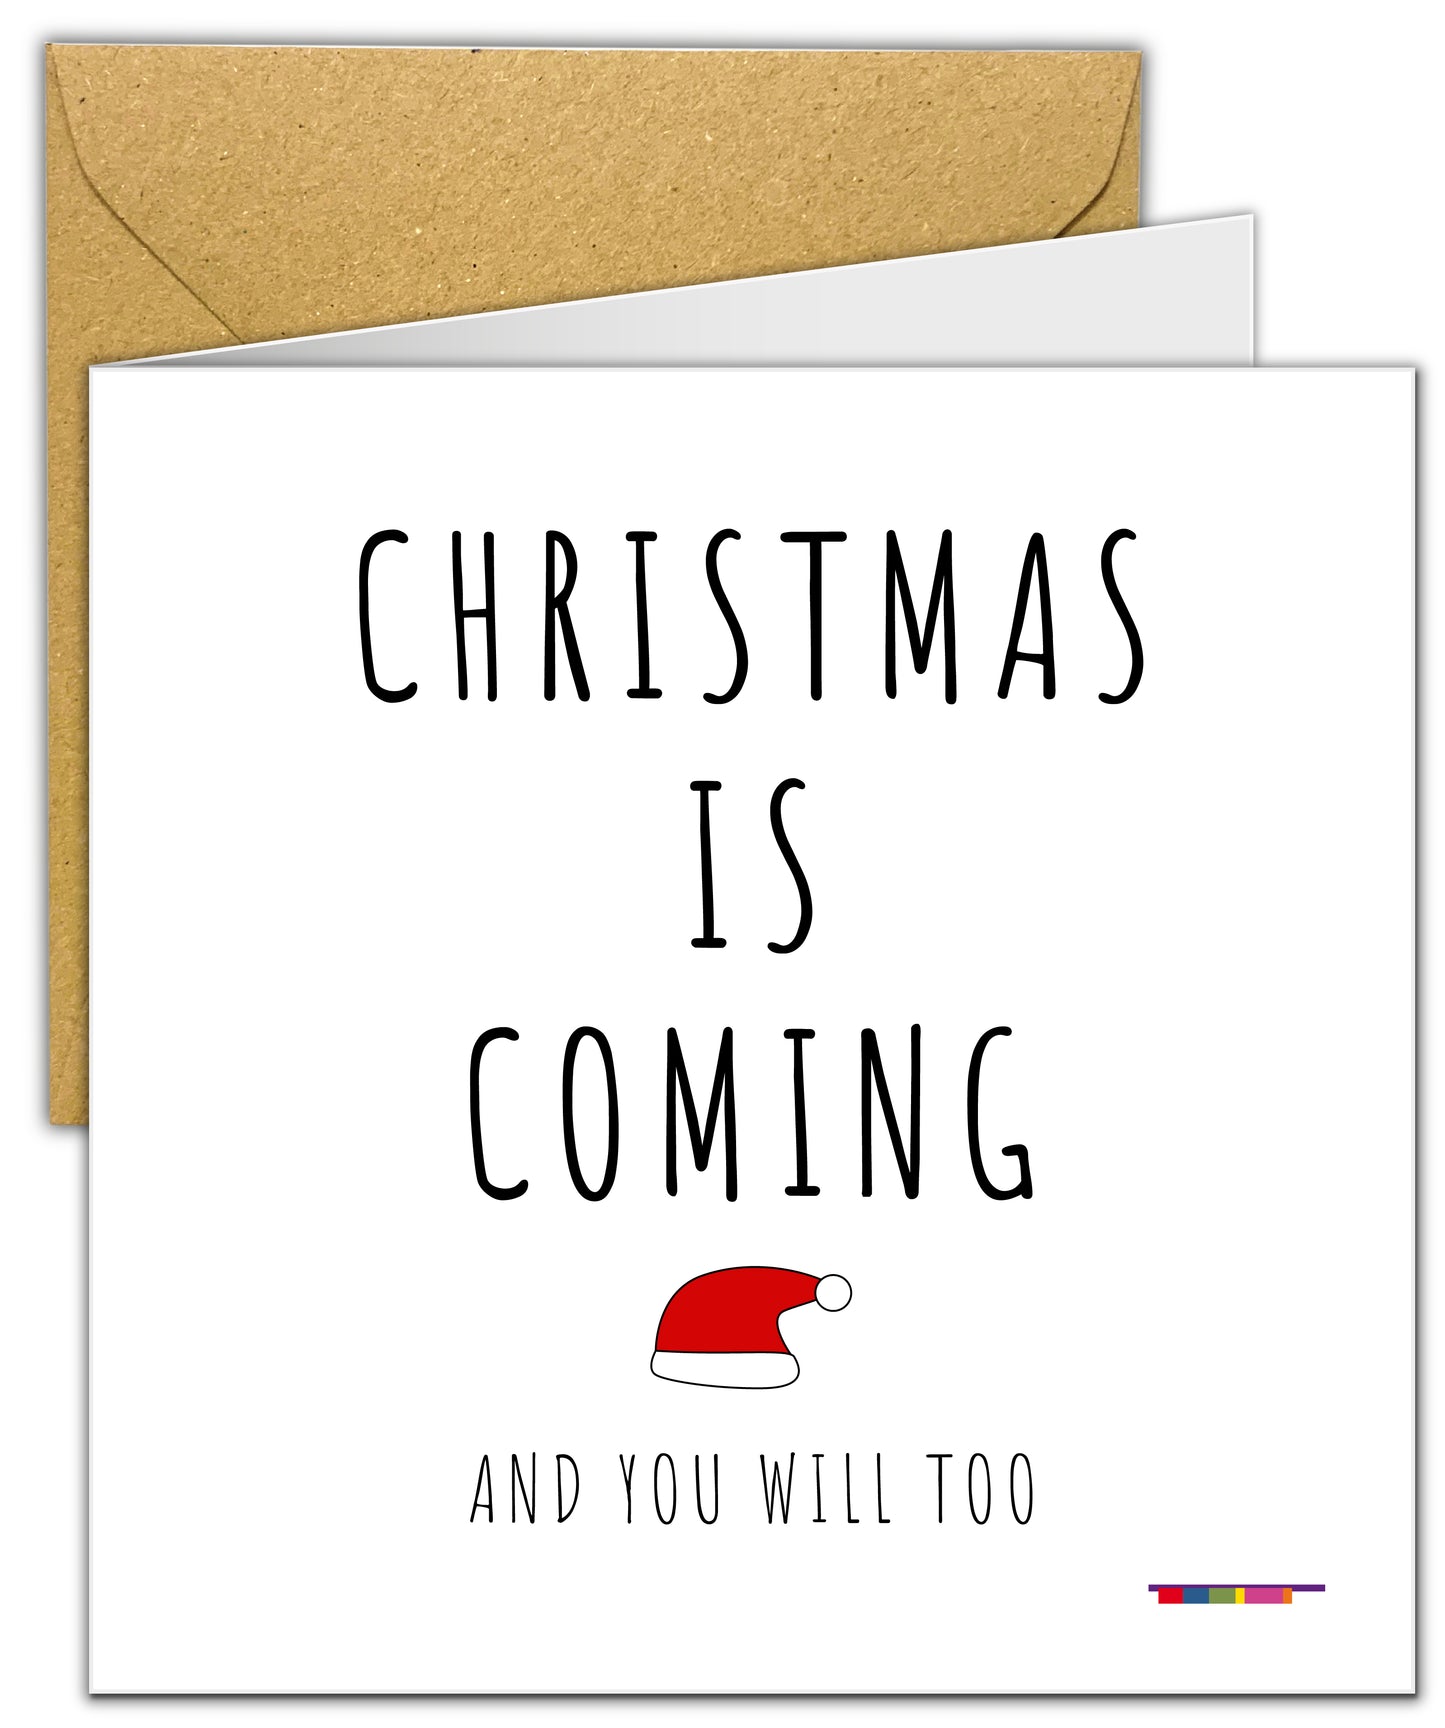 Rude Funny Christmas Cards - For Him Her Boyfriend Girlfriend Husband Wife